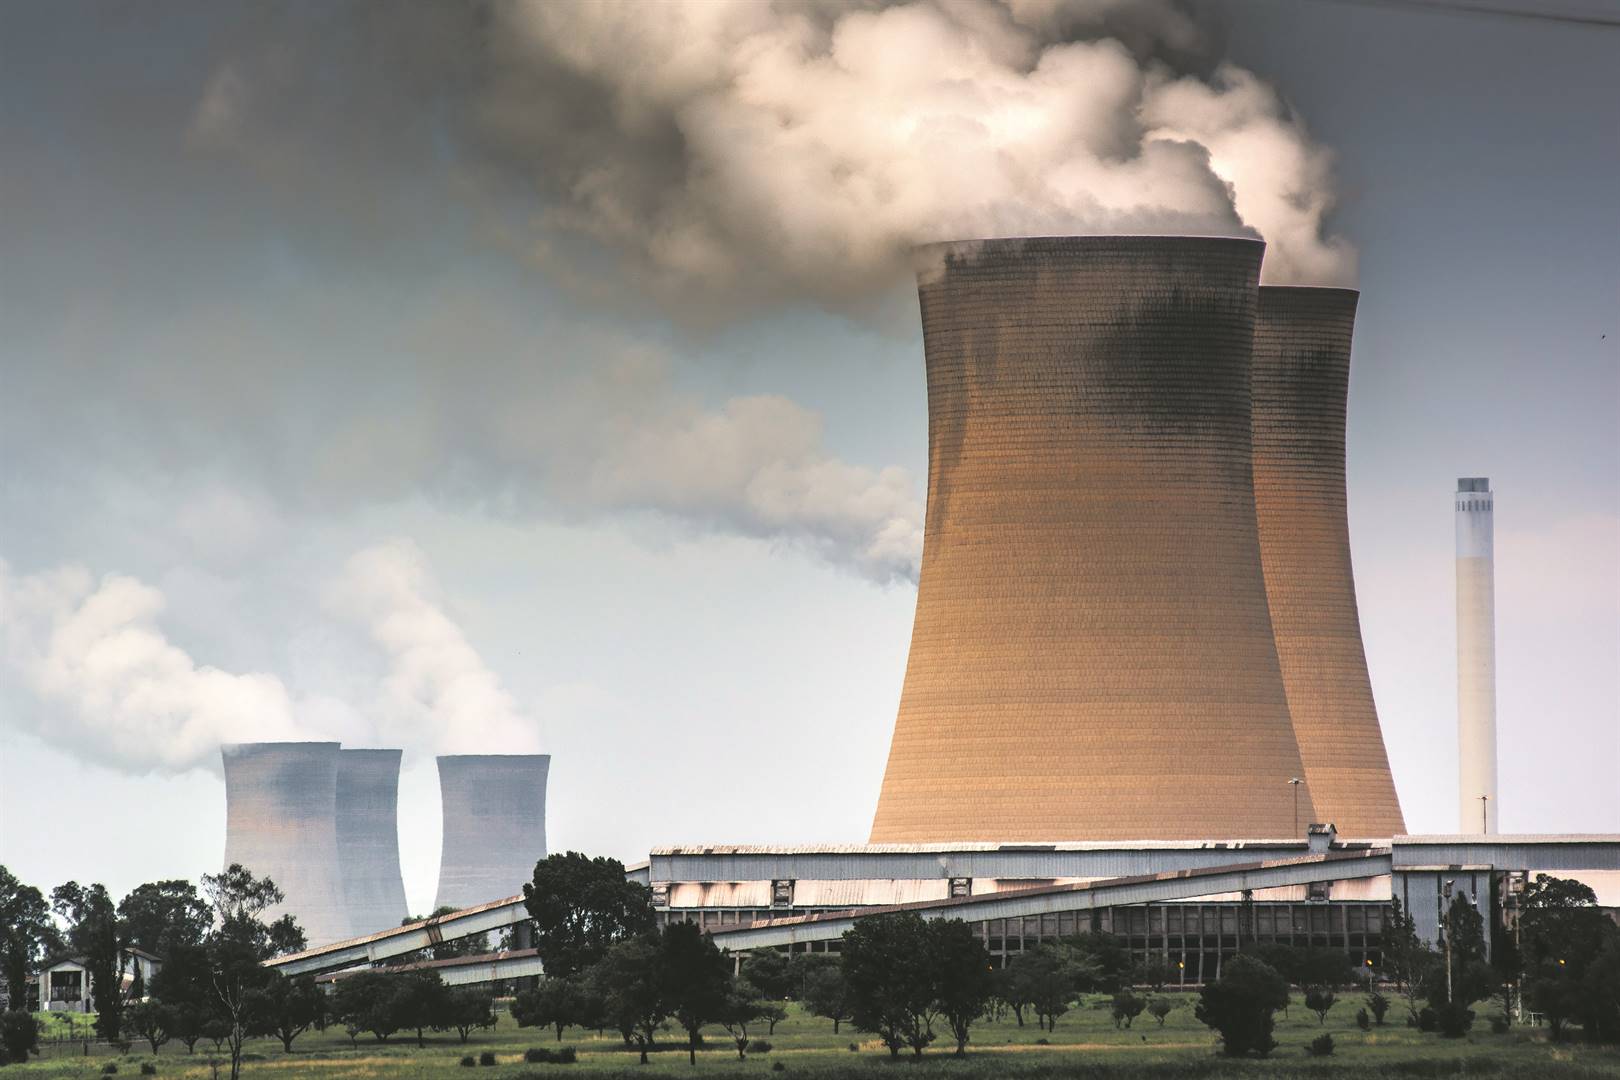 Eskom's Mpumalanga coal plants have been singled out for their severe impact on the environment and public health.